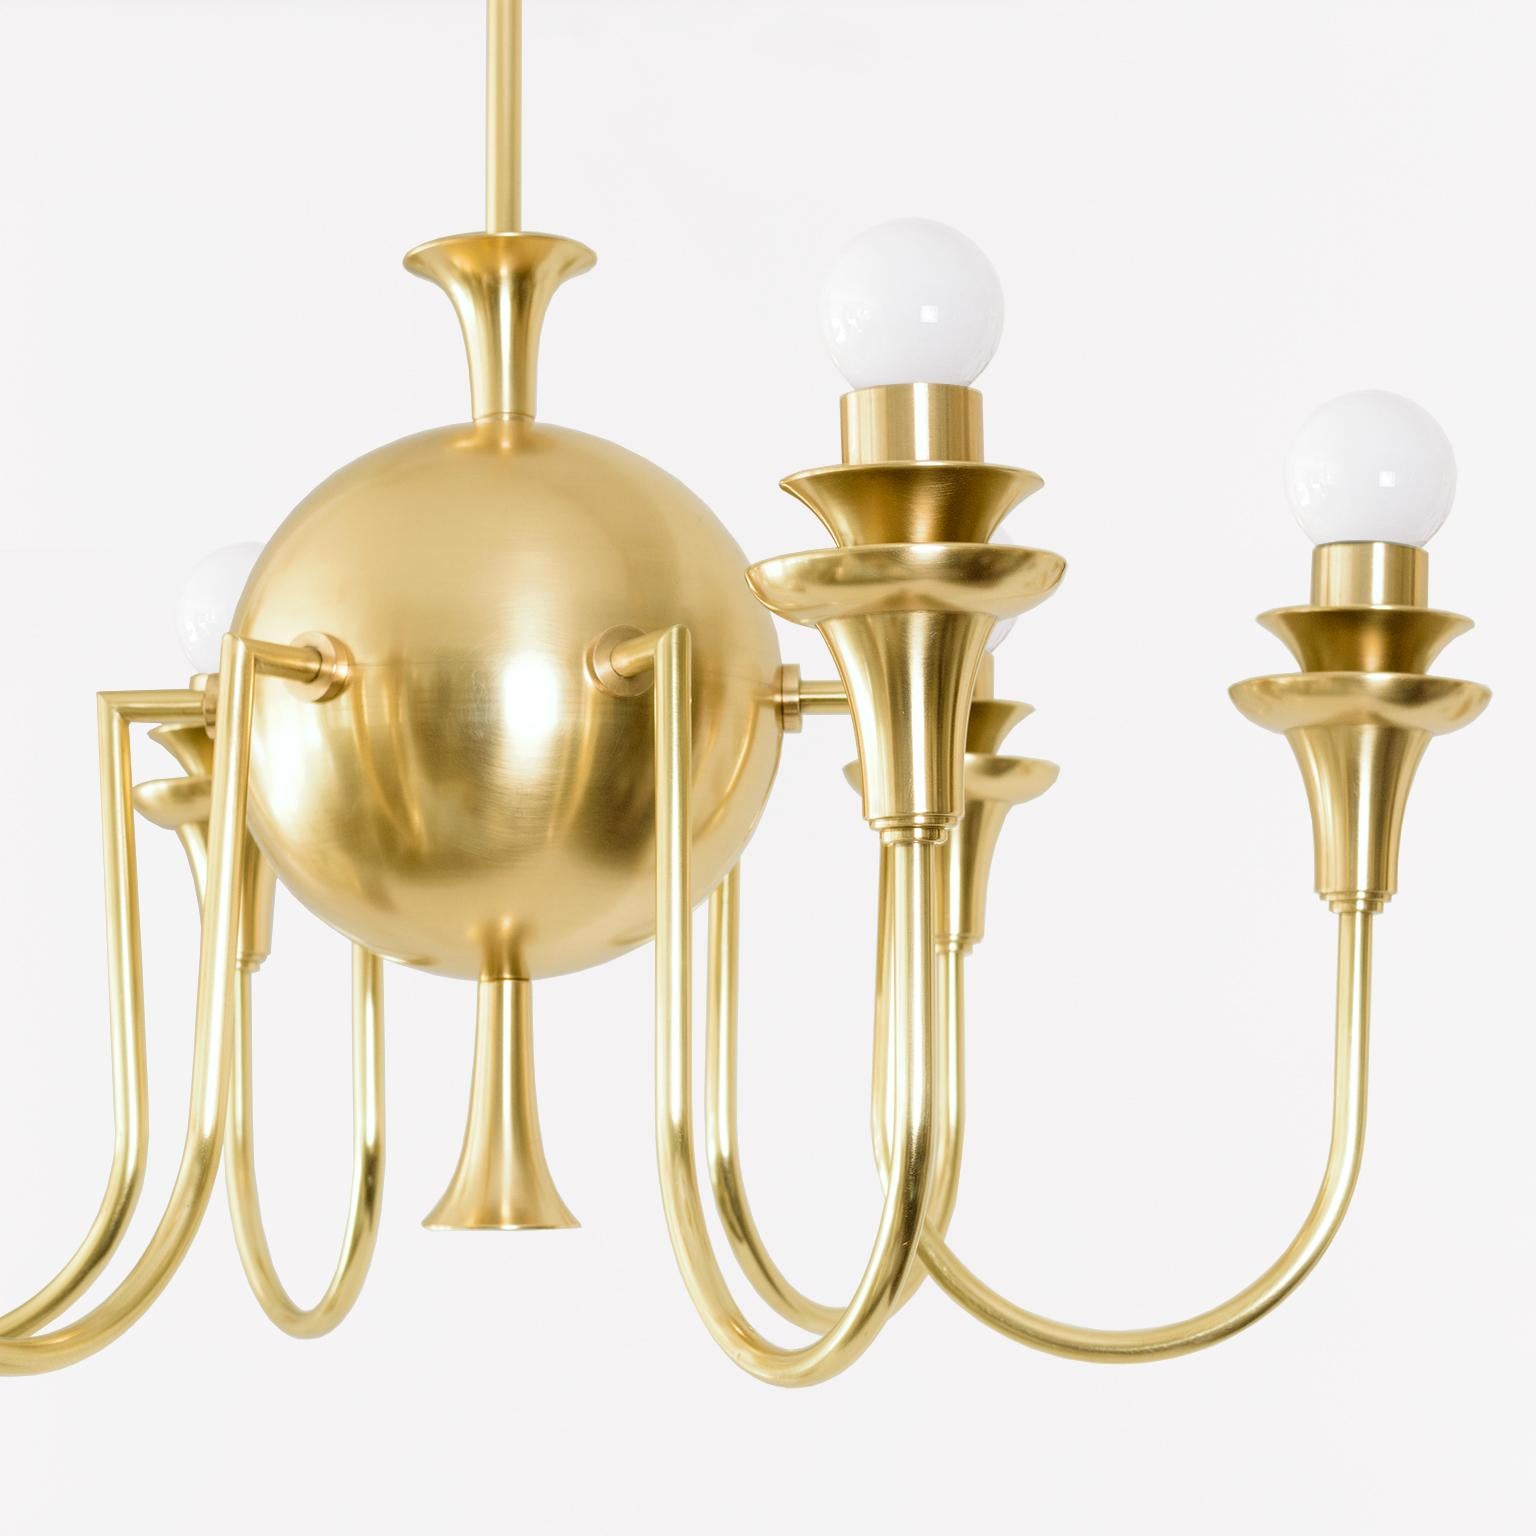 Swedish Grace Six-Arm Globe Chandelier, in Polished Brass, circa 1930 In Good Condition For Sale In New York, NY